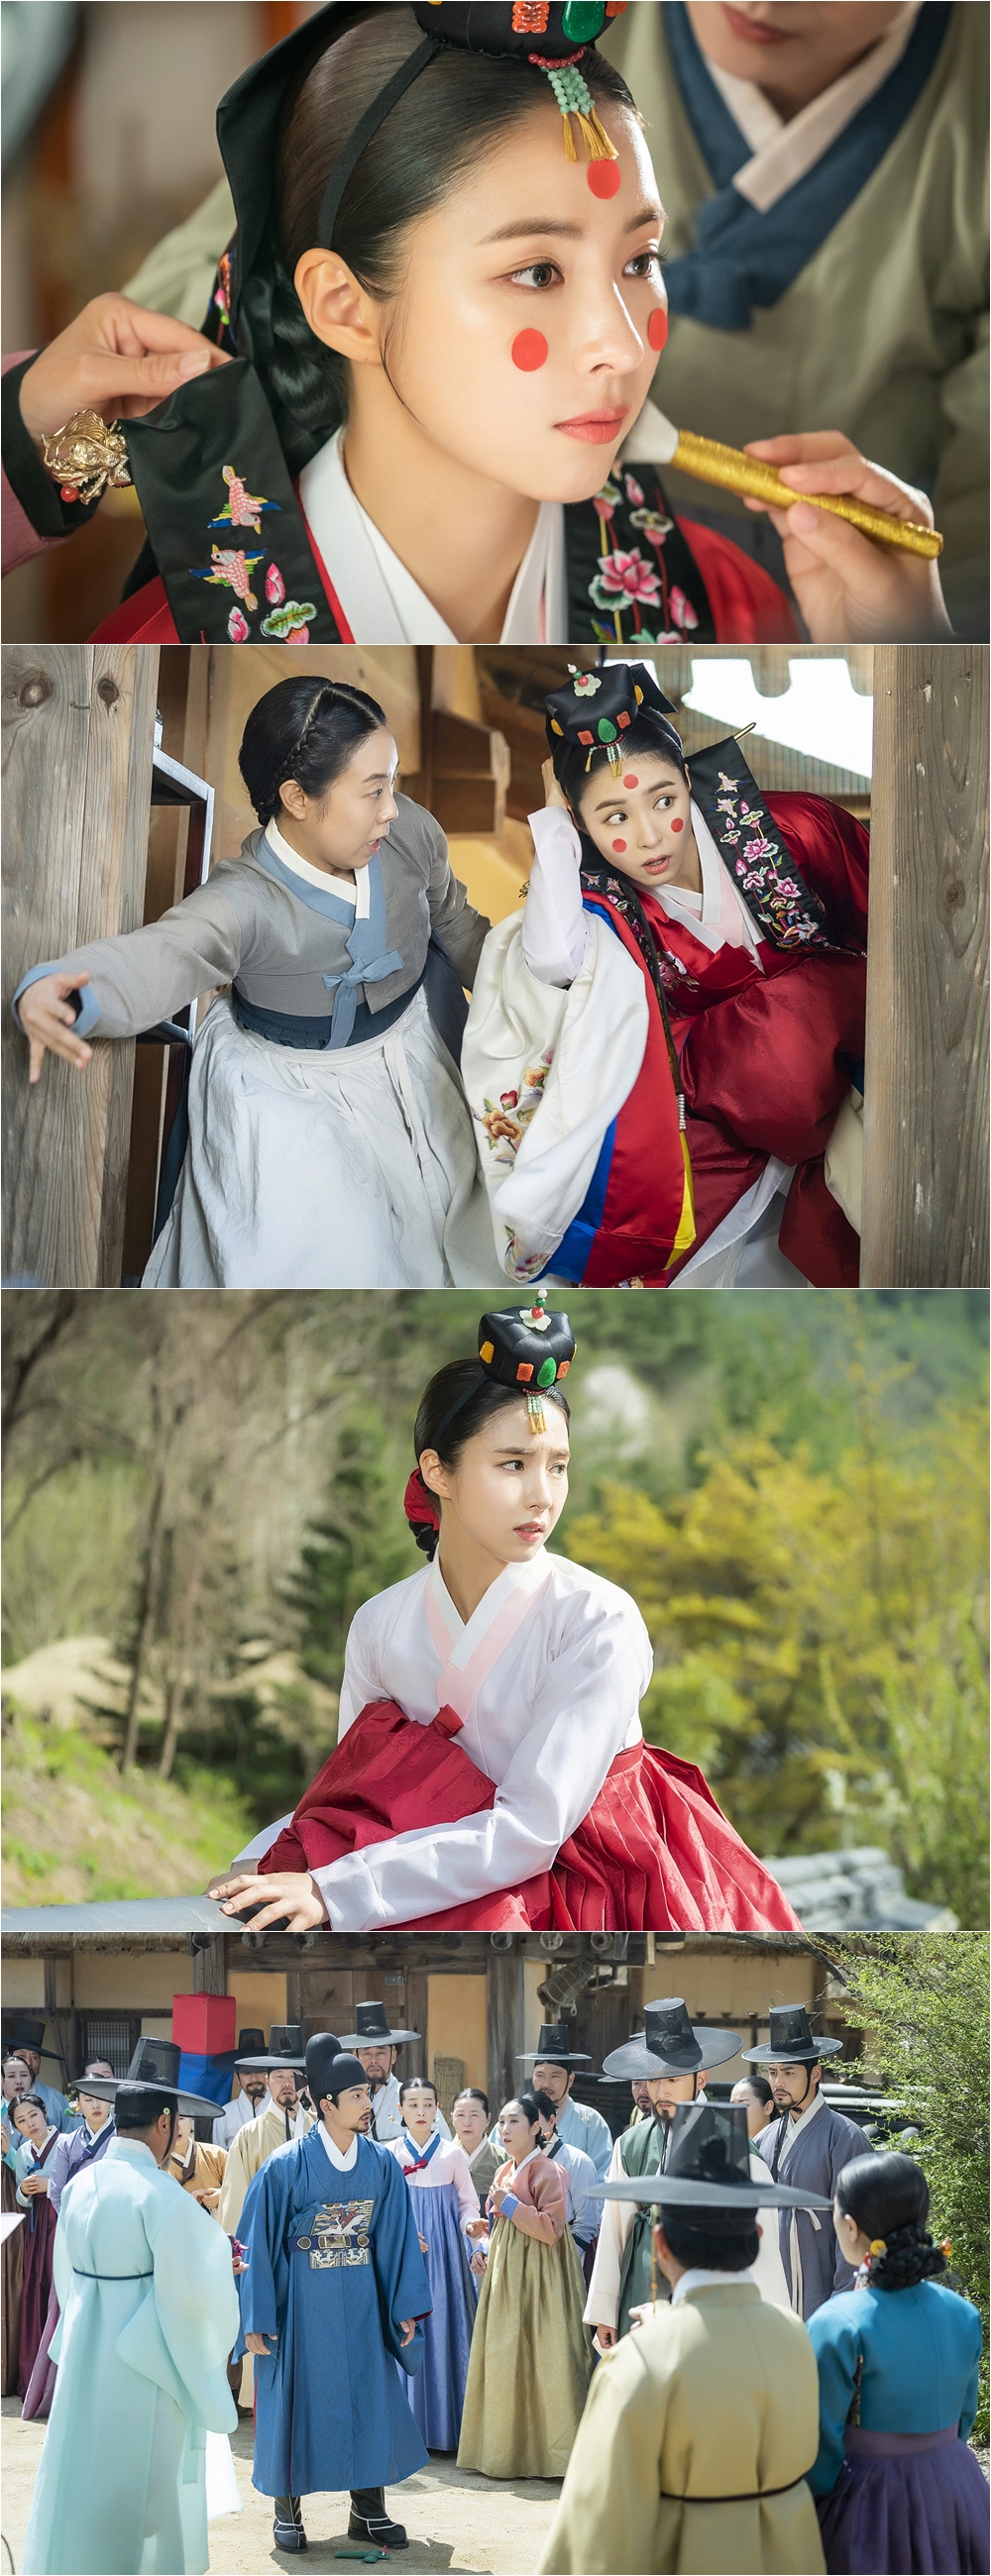 The wedding ceremony of the new employee, Na Hae-ryung, Shin Se-kyung, will be held.MBCs drama Na Hae-ryung (played by Kim Ho-soo, directed by Kang Il-soo and Han Hyun-hee, and produced Green Snake Media) released a steel featuring the appearance of Koo Na Hae-ryung (Shin Se-kyung), who is trying to make an Esapce ahead of the wedding ceremony on the 18th.Na Hae-ryung, starring Shin Se-kyung, Cha Eun-woo, and Park Ki-woong, is the first problematic first lady () of Joseon and the full-length romance of Phil by Prince Lee Rim (Cha Eun-woo), the anti-war mother.Lee Ji-hoon, Park Ji-hyun and other young actors, Kim Ji-jin, Kim Min-sang, Choi Duk-moon, and Sung Ji-ru.In the photo, Na Hae-ryung, who is dressed as a bride, was shown.Na Hae-ryung, who finished the new bride visual with a patriarchy and traditional wedding dress, is dressed with a soulless look rather than a happy smile.Na Hae-ryung is then moving in secret with the help of the somatoma Sulgeum (brewed mother).Her head is sneaking out of the back door, not the wedding ceremony, and she wonders what the two are up to.Especially, Na Hae-ryung, who threw off his wedding dress, is attracted to the attention because he is hesitant just before he jumps on the wall.She adds curiosity about why she is trying to get out of the wedding ceremony and what she is hesitating about.Finally, the wedding ceremony, which became a mess, is open to the public.Lee Seung-hoon (Seo Young-joo), who wore a private mother and wore a blue wedding dress, and Koo Jae-kyung (Fairy Hwan), the brother of Na Hae-ryung, are both shocked and unable to speak.Na Hae-ryung, said Na Hae-ryung, is going to have a lifetime of Esapce Operations ahead of the wedding ceremony.I hope you will confirm on this broadcast today (18th) whether her operations will be successful and what results will be produced. 